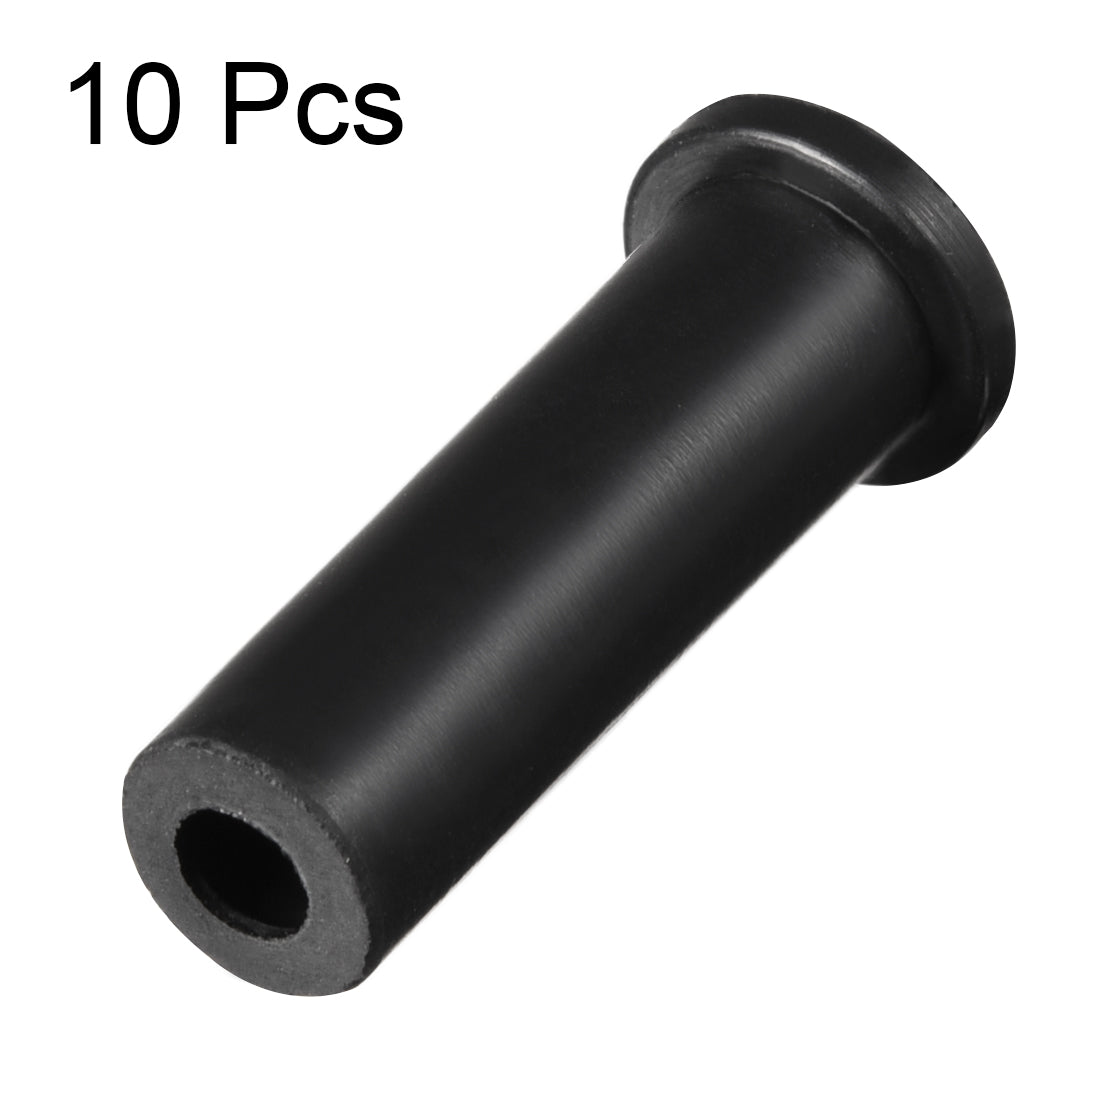 uxcell Uxcell 10pcs 10-6mm PVC Strain Relief Cord Boot Protector 39mm for Power Tool  Black